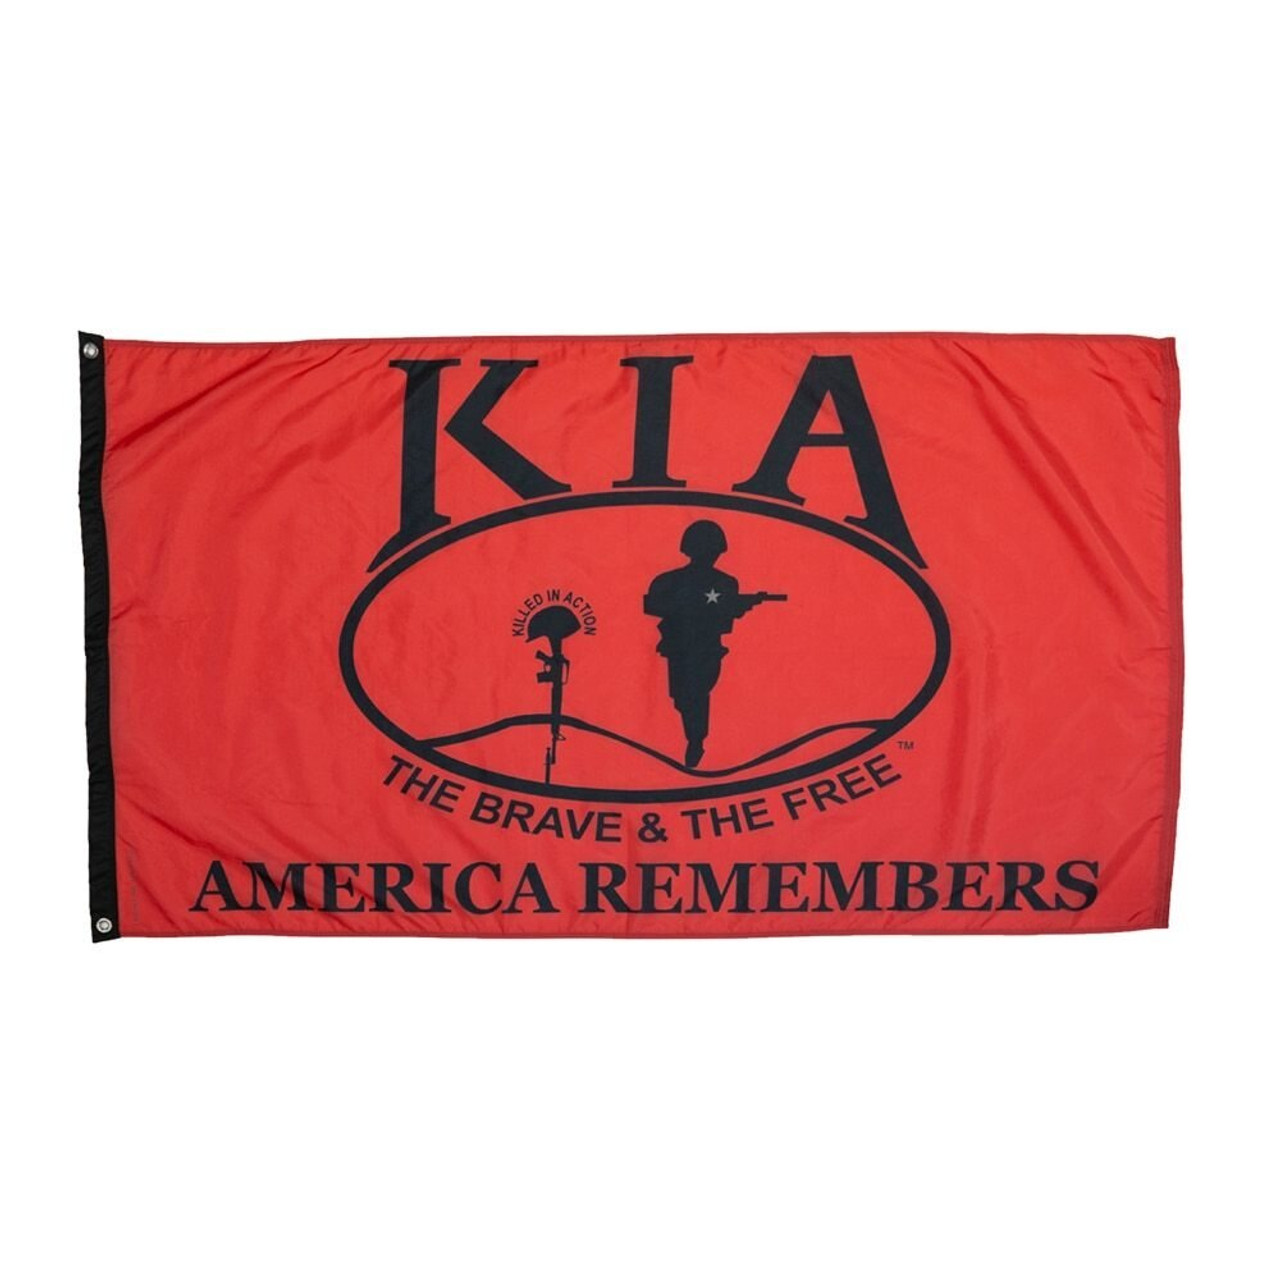 The KIA Flag is red with black text that reads “KIA,” “the brave & the free,” and “America Remembers,” and a soldier in the middle.